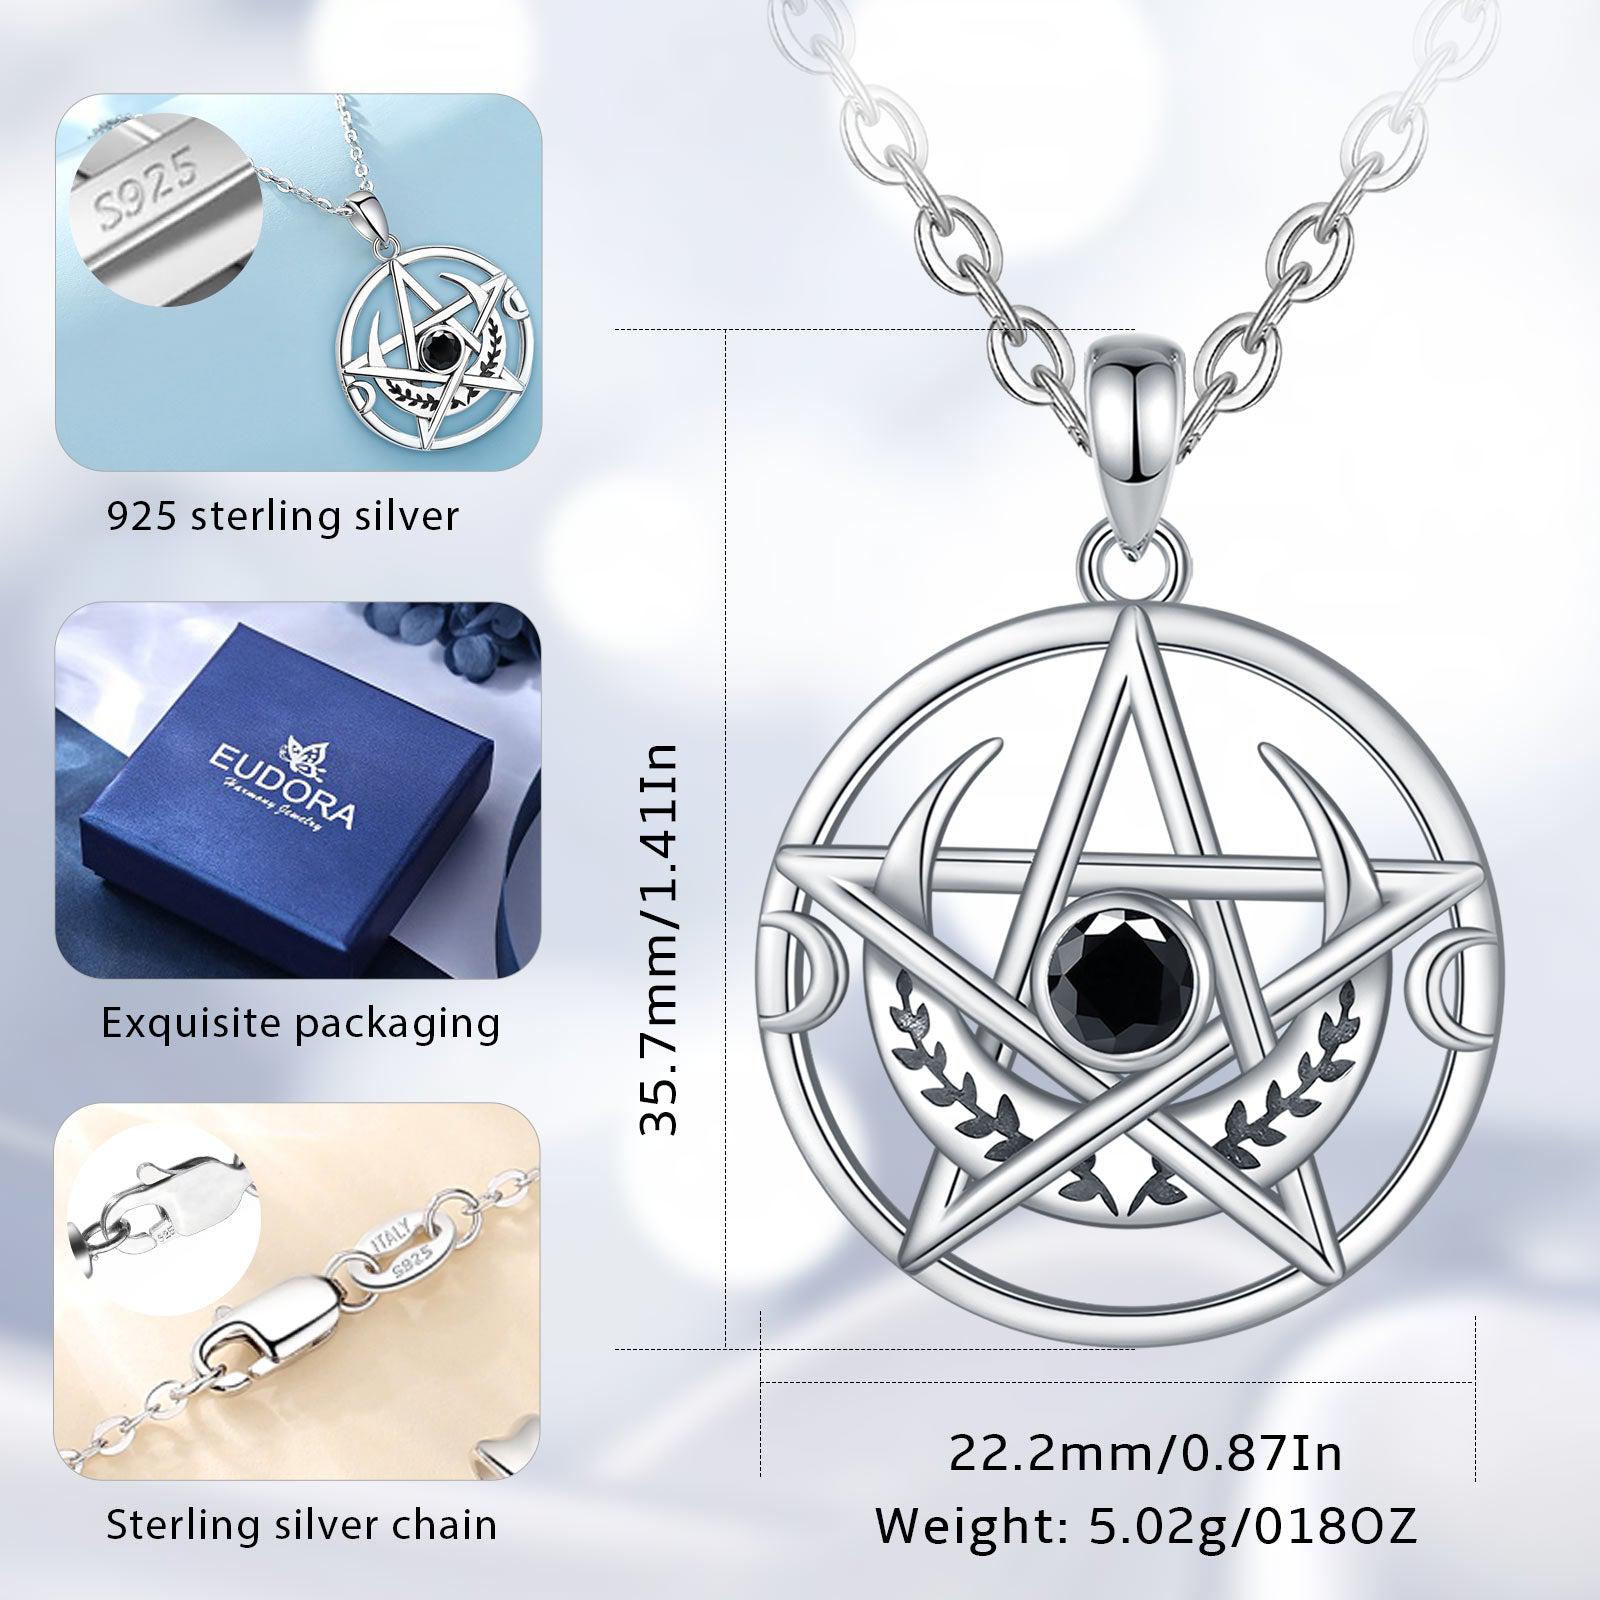 Witch Moon Pentagram Necklace Wiccan Jewelry-MoonChildWorld